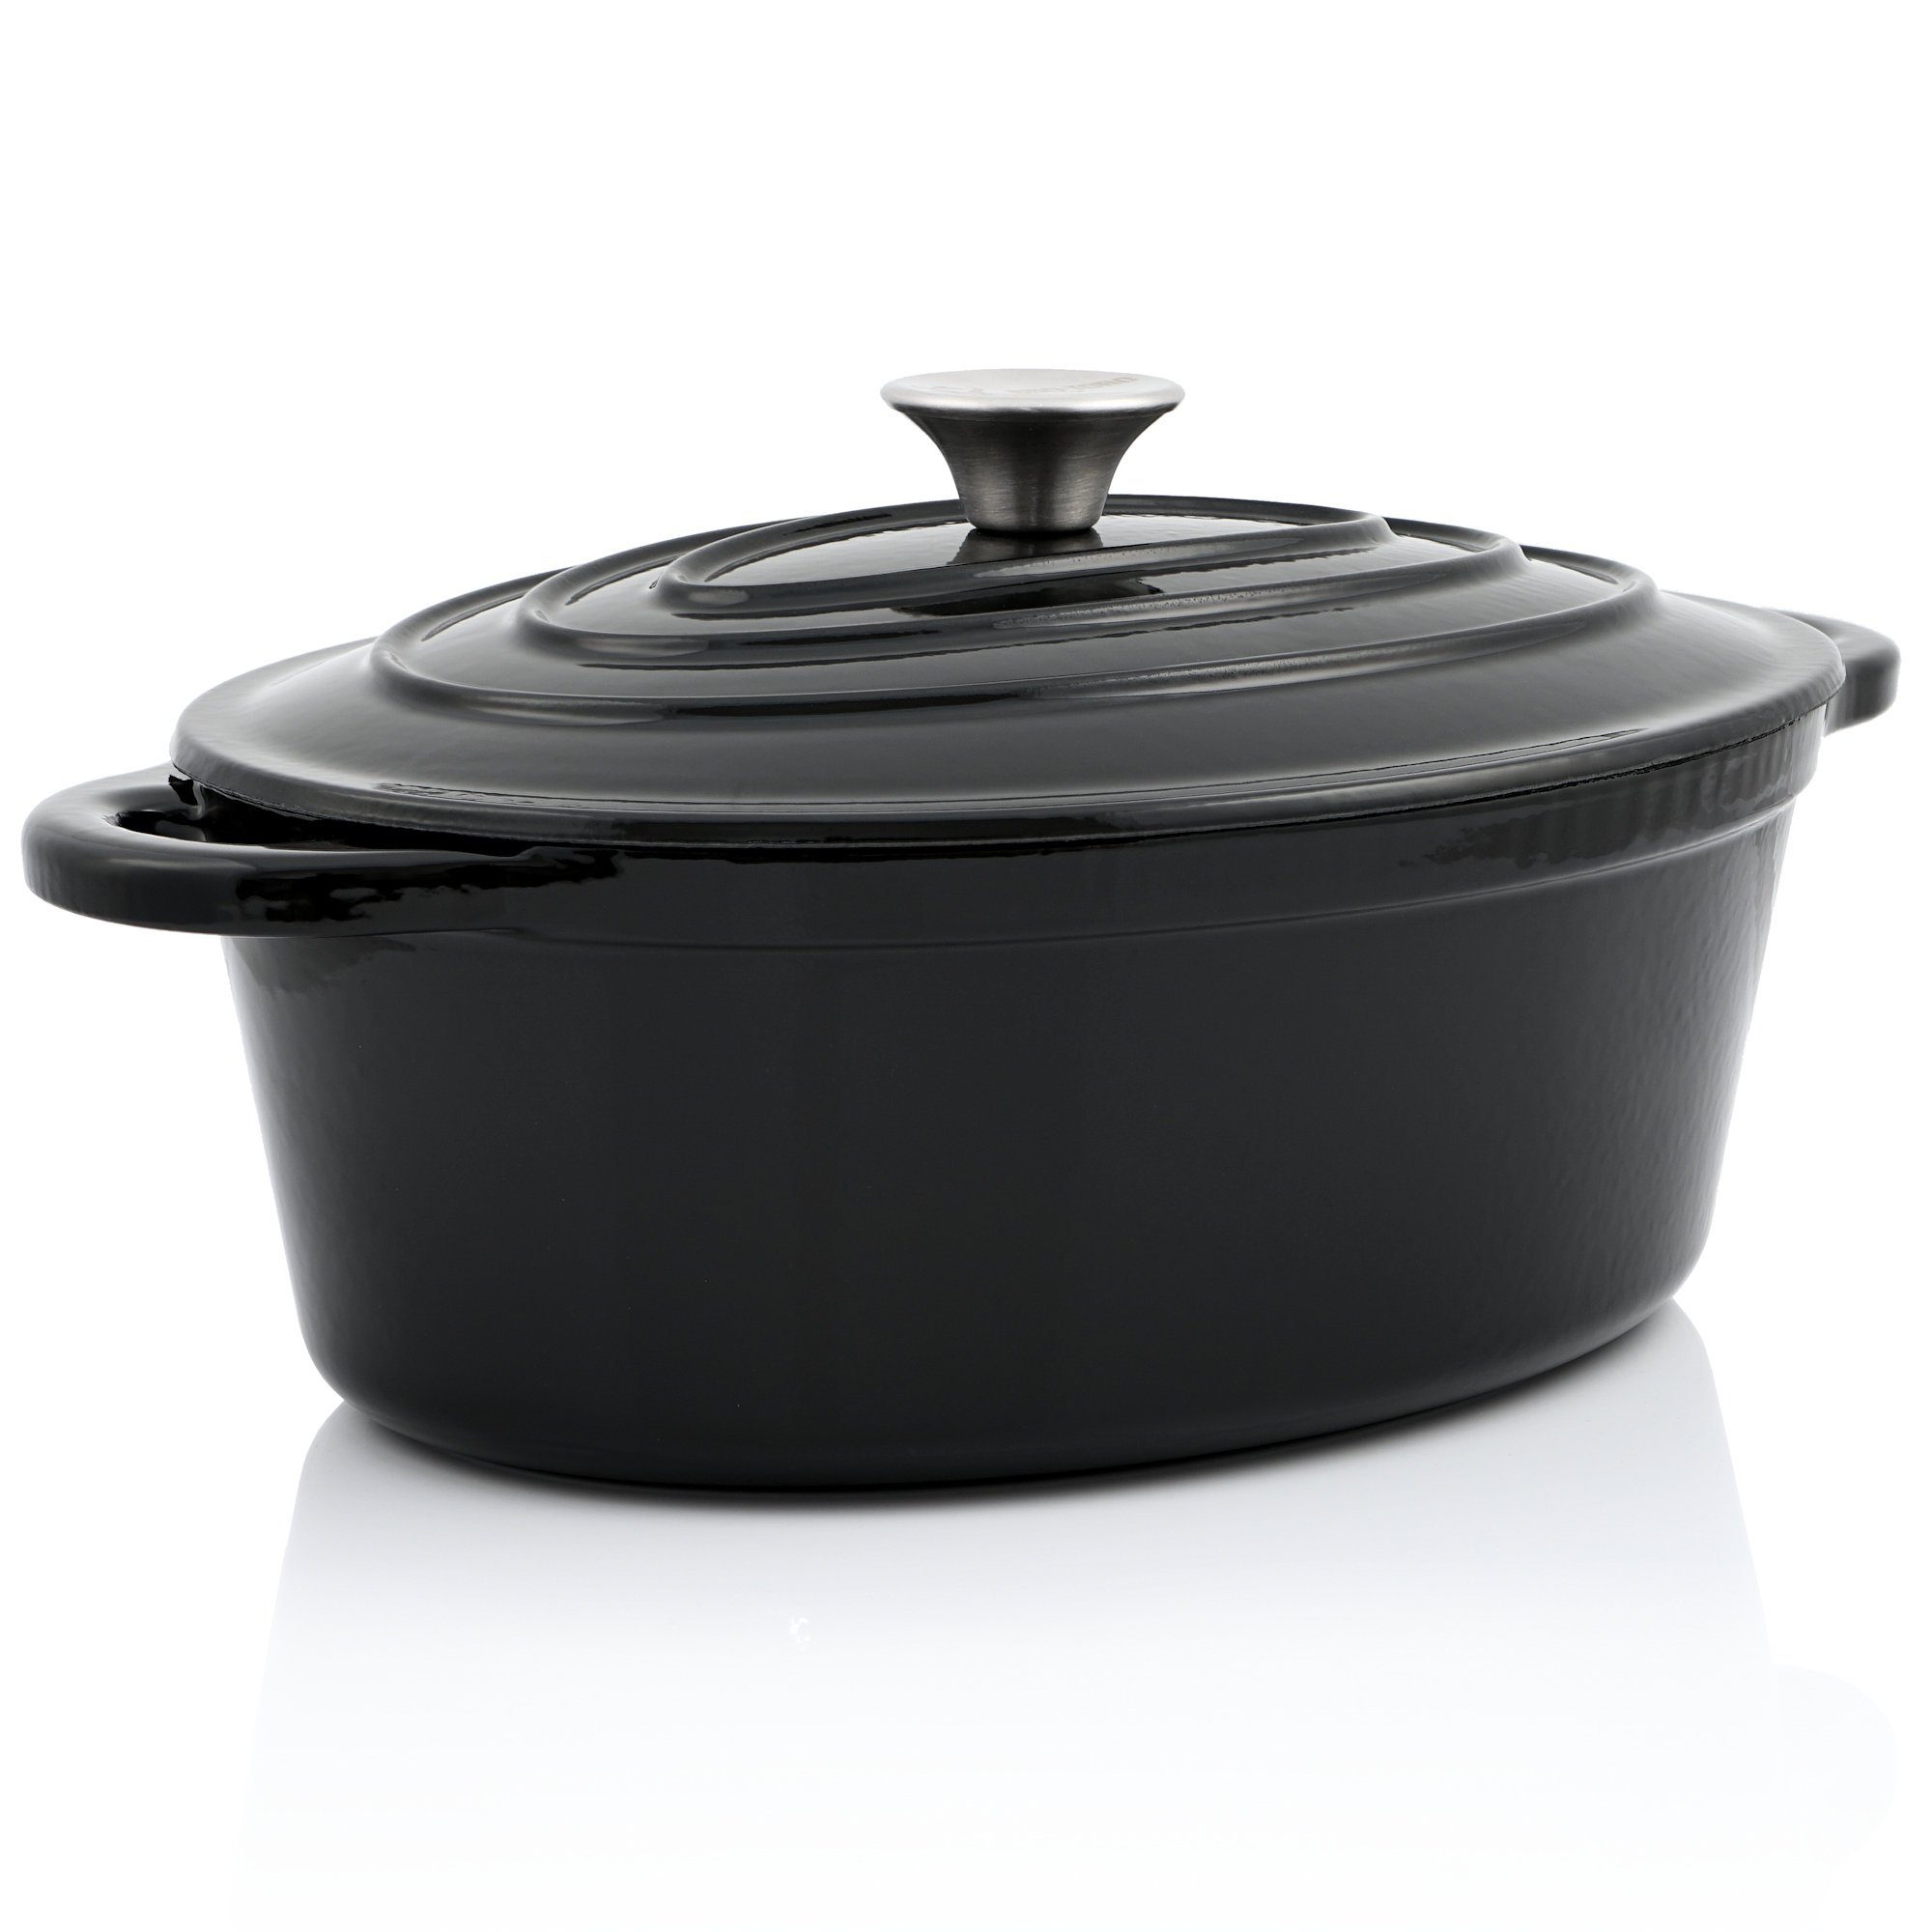 Cocotte, Gusseisen 4,3l, Bräter oval, emailliert, BBQ-Toro Gusseisen Gusseisen schwarz, Bräter